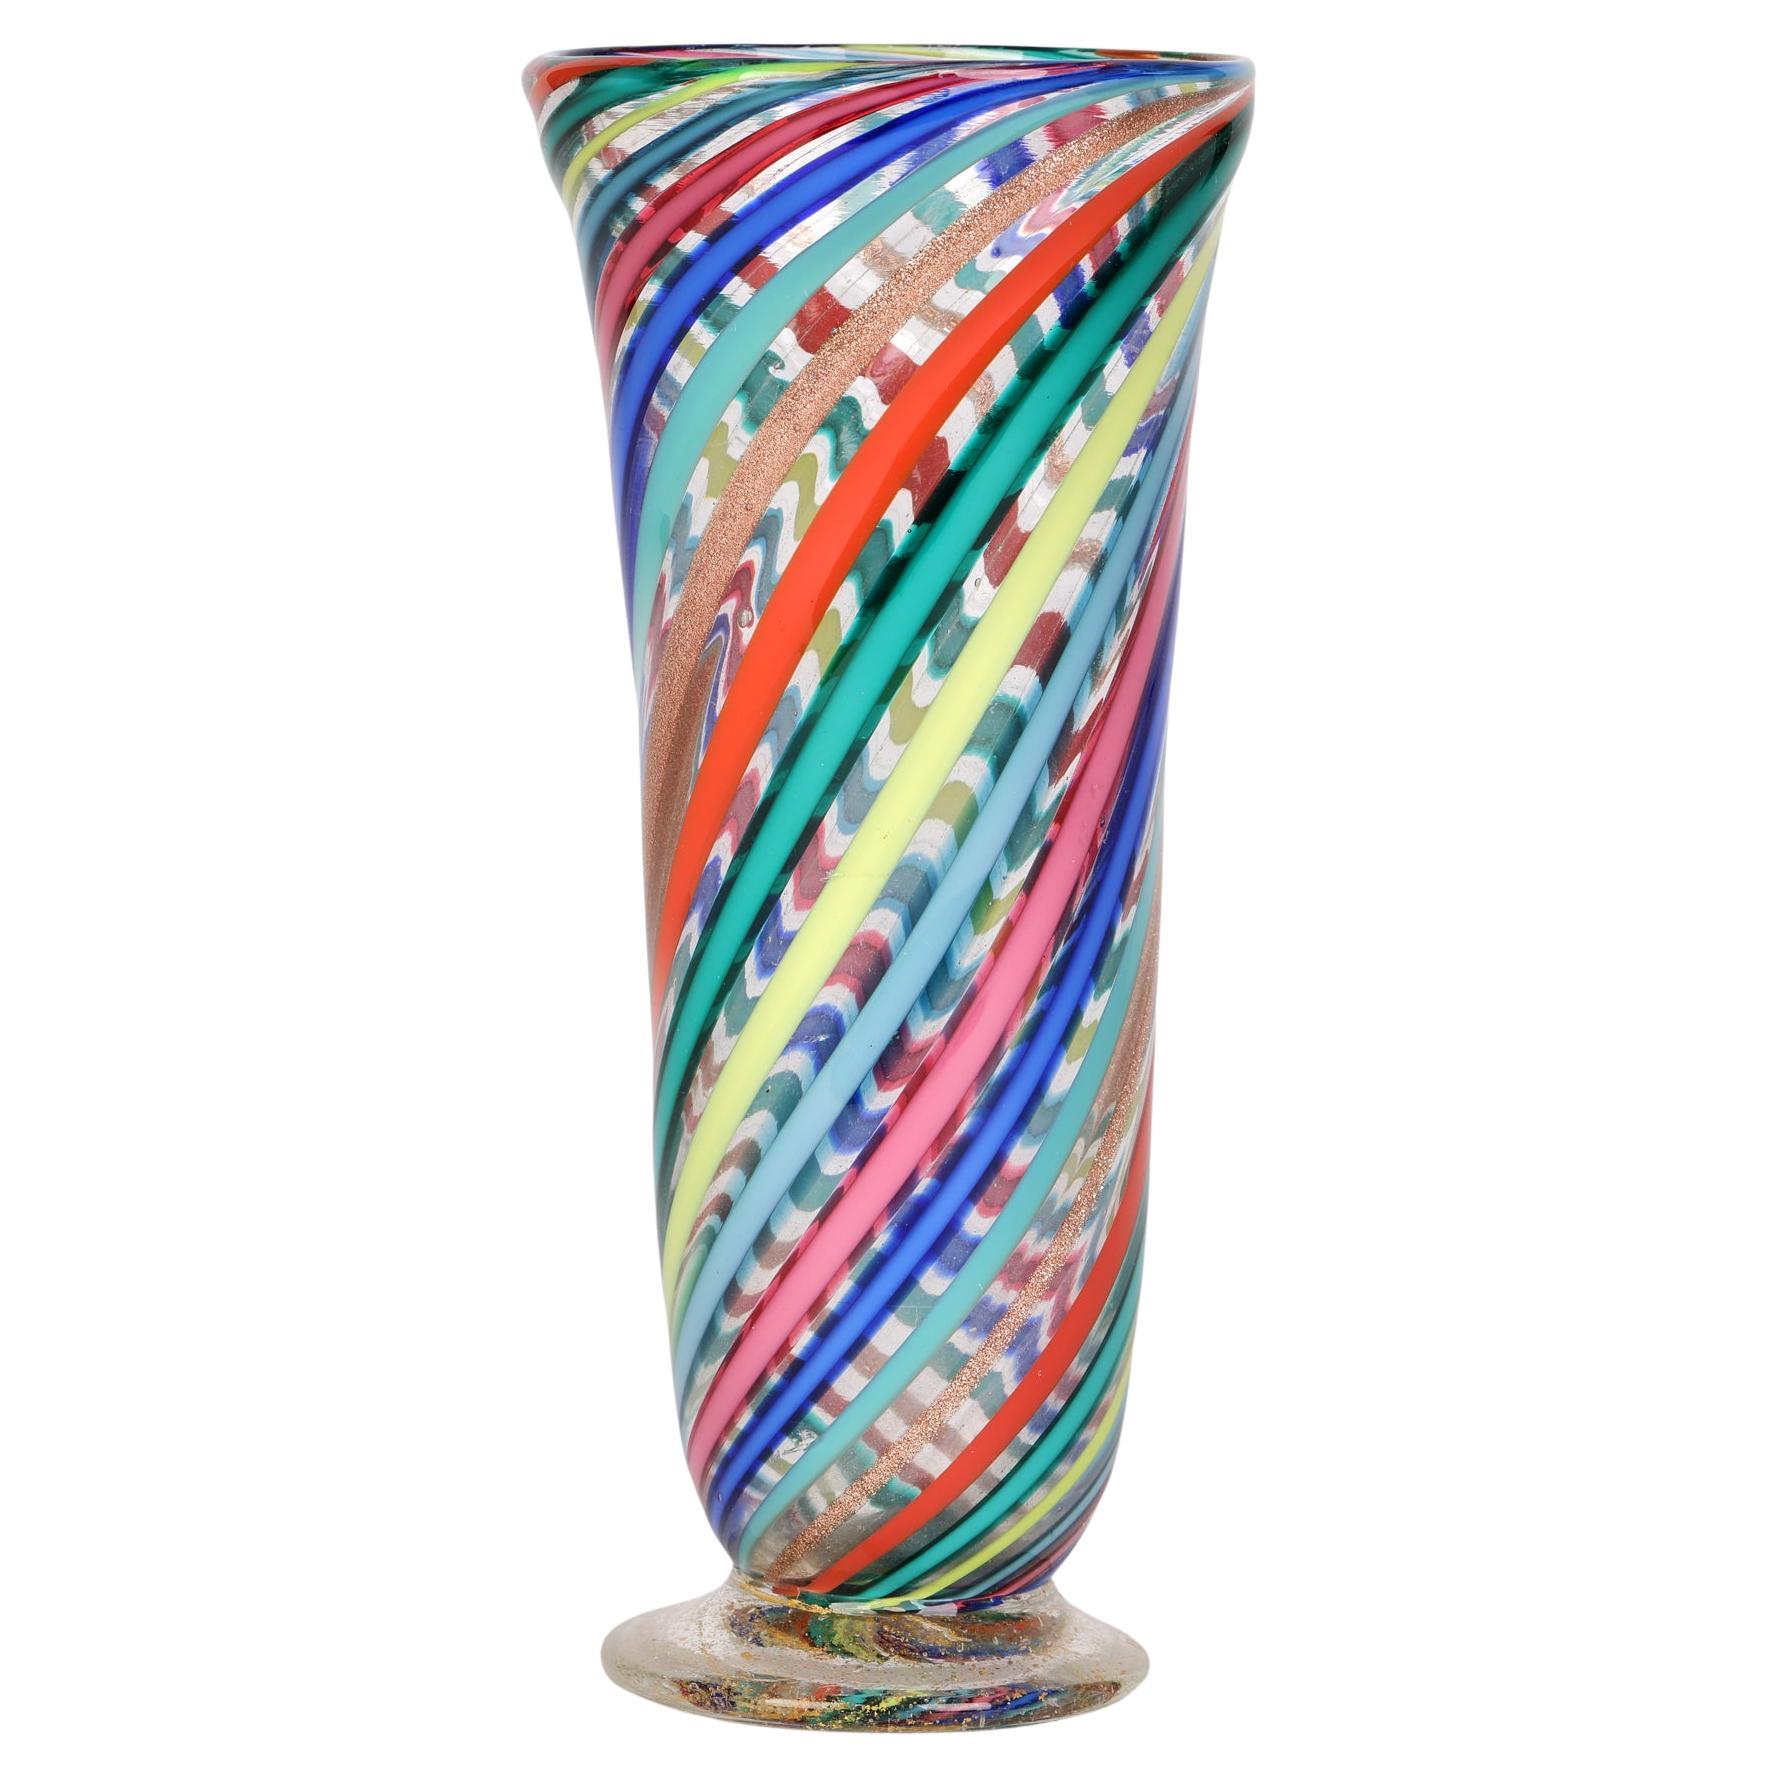 Gio Ponti Attributed Murano a Canne Art Glass Vase